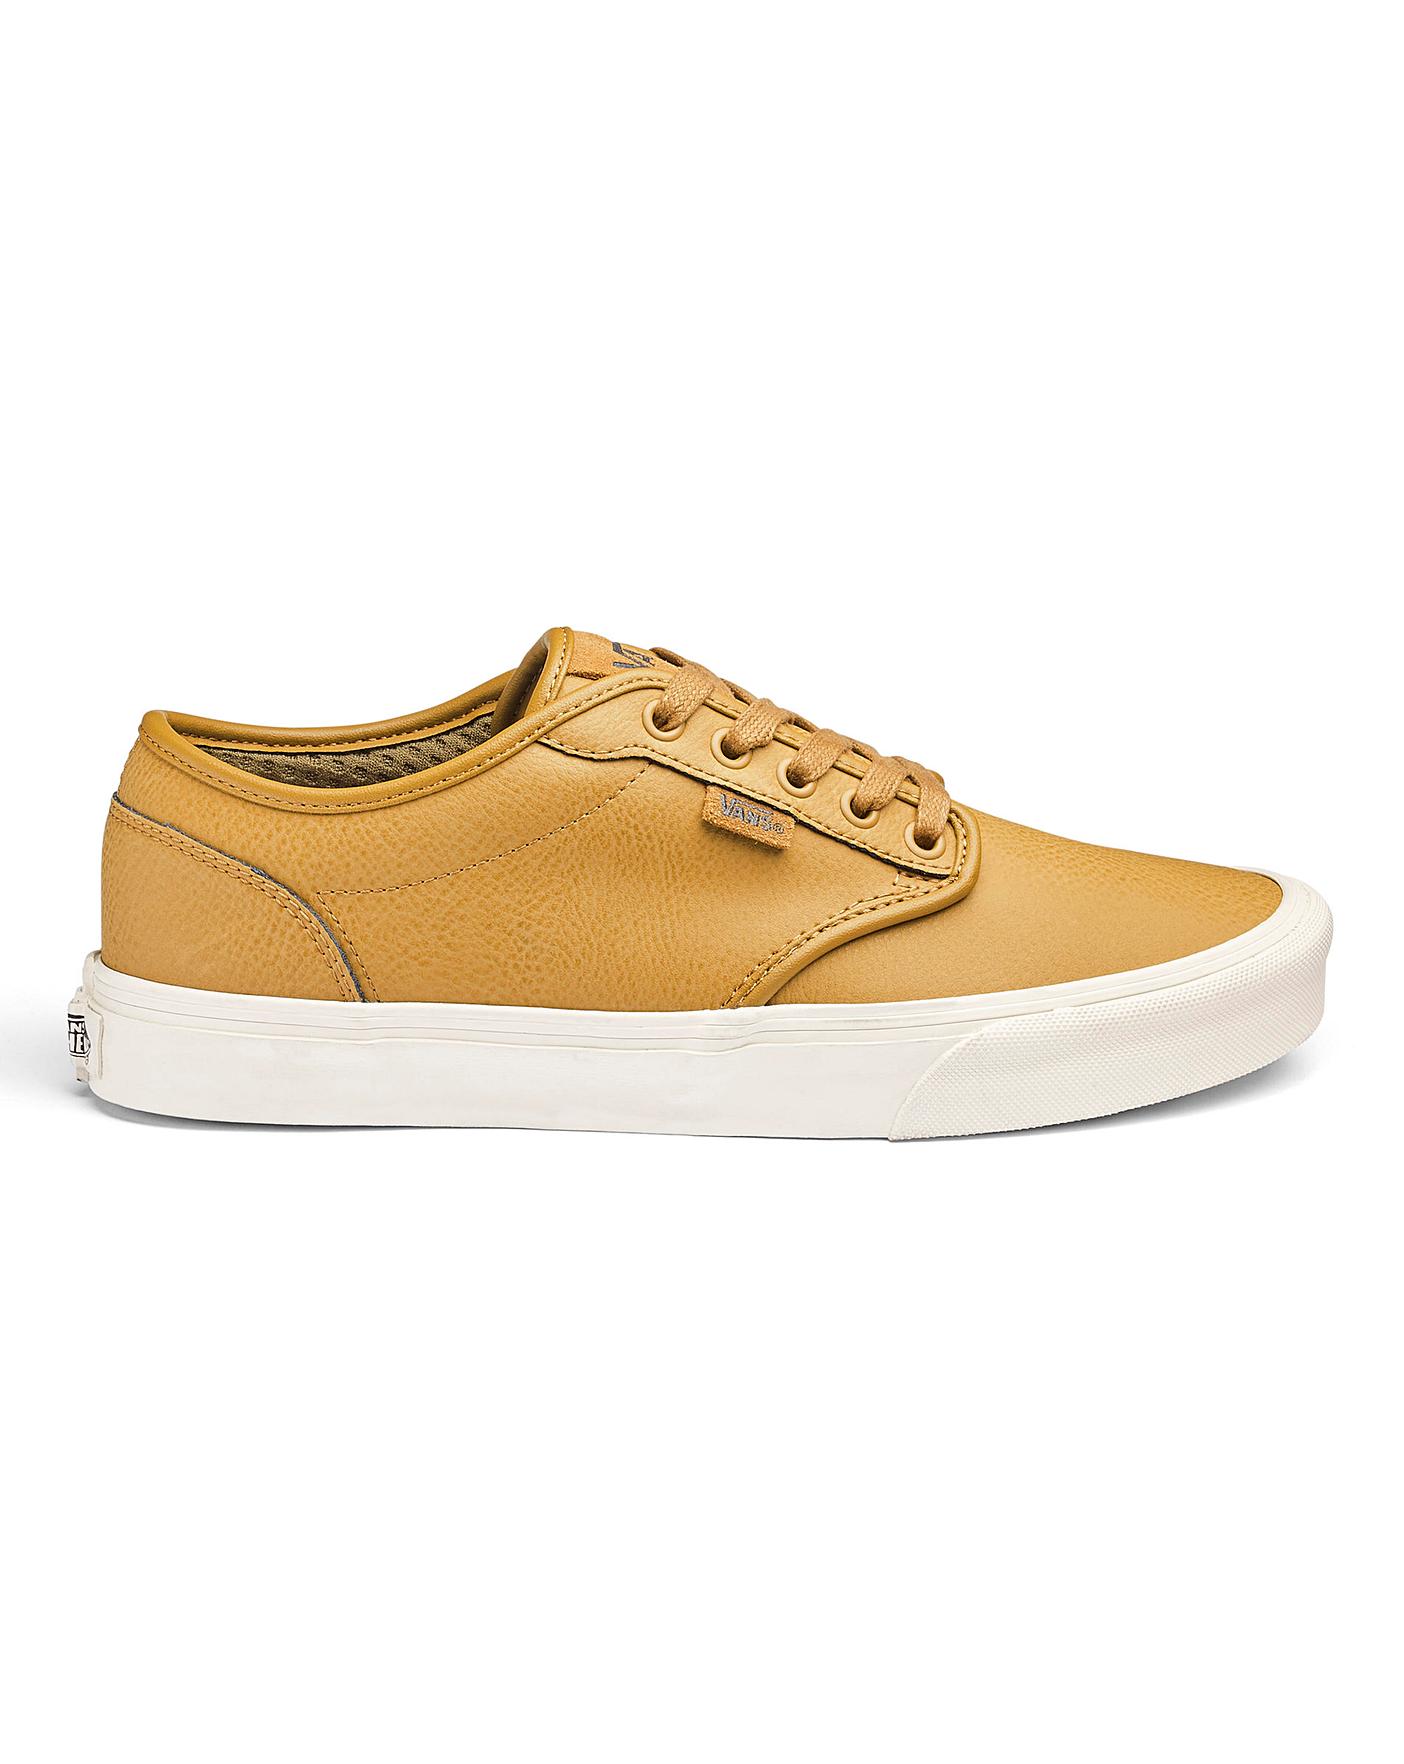 Vans Atwood Leather Lace Mens Trainers 